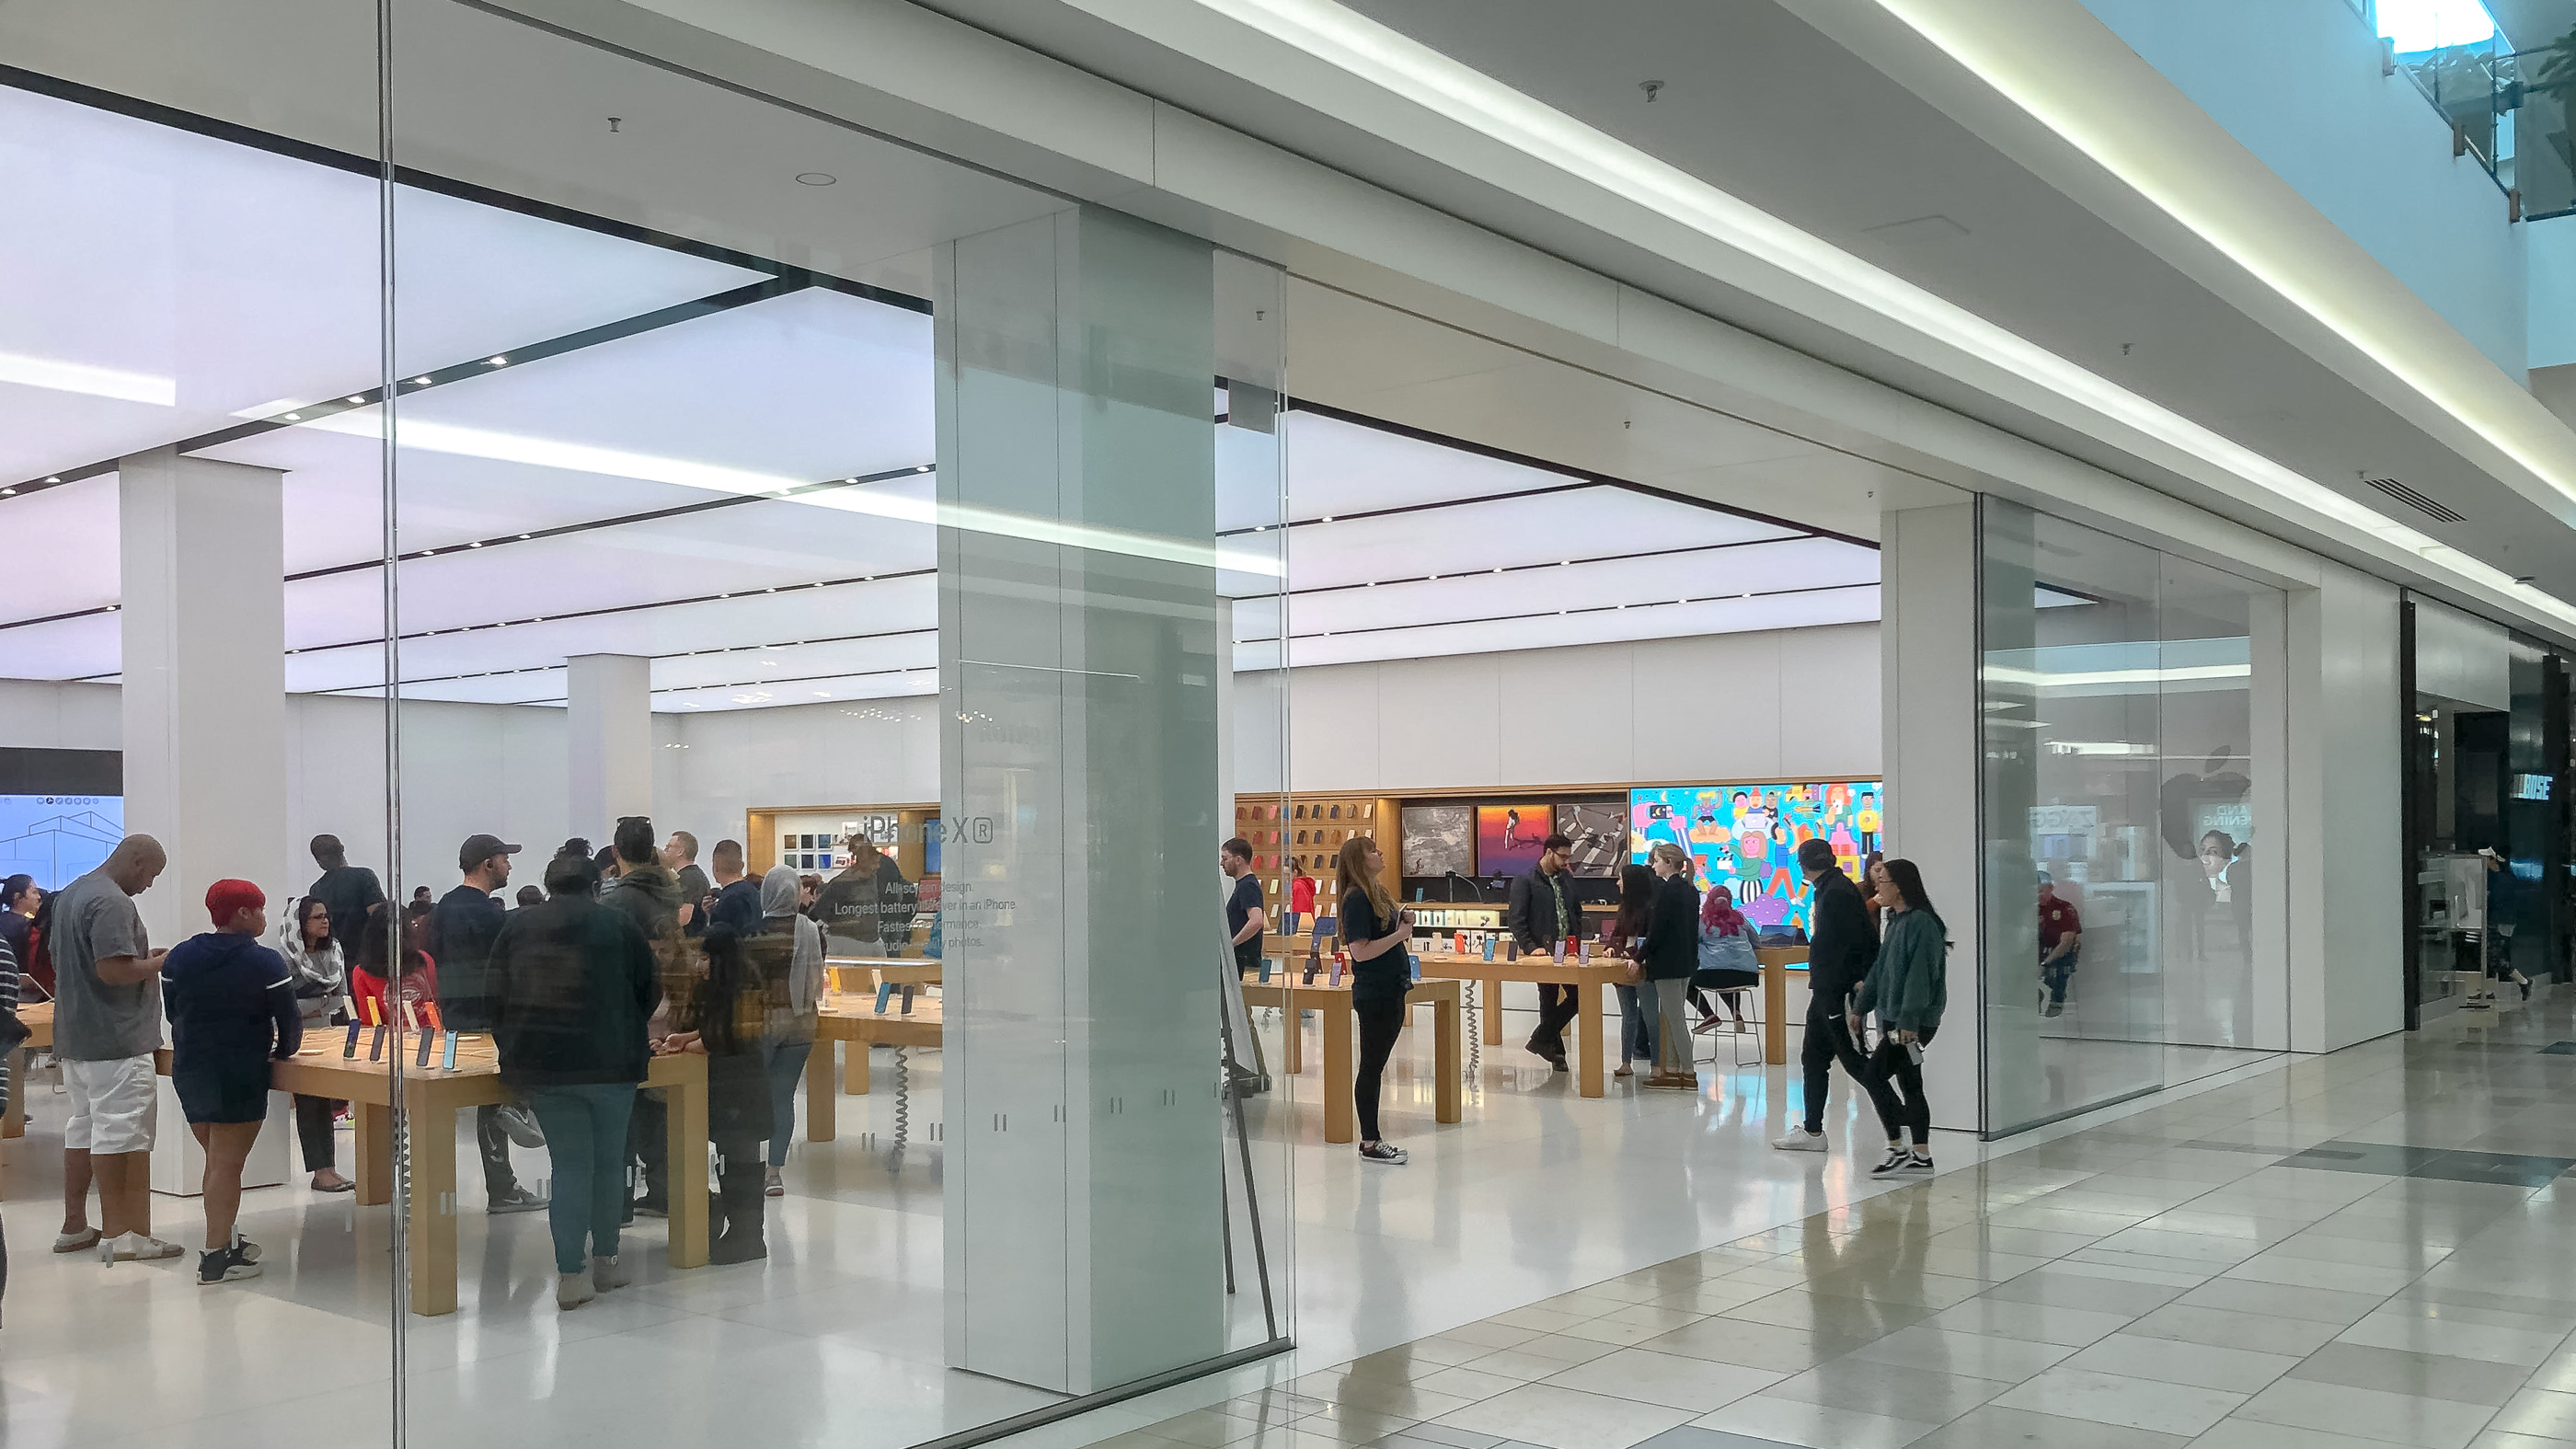 Apple plans new store for Galleria Dallas; Plano and Frisco, Texas  locations may close - 9to5Mac